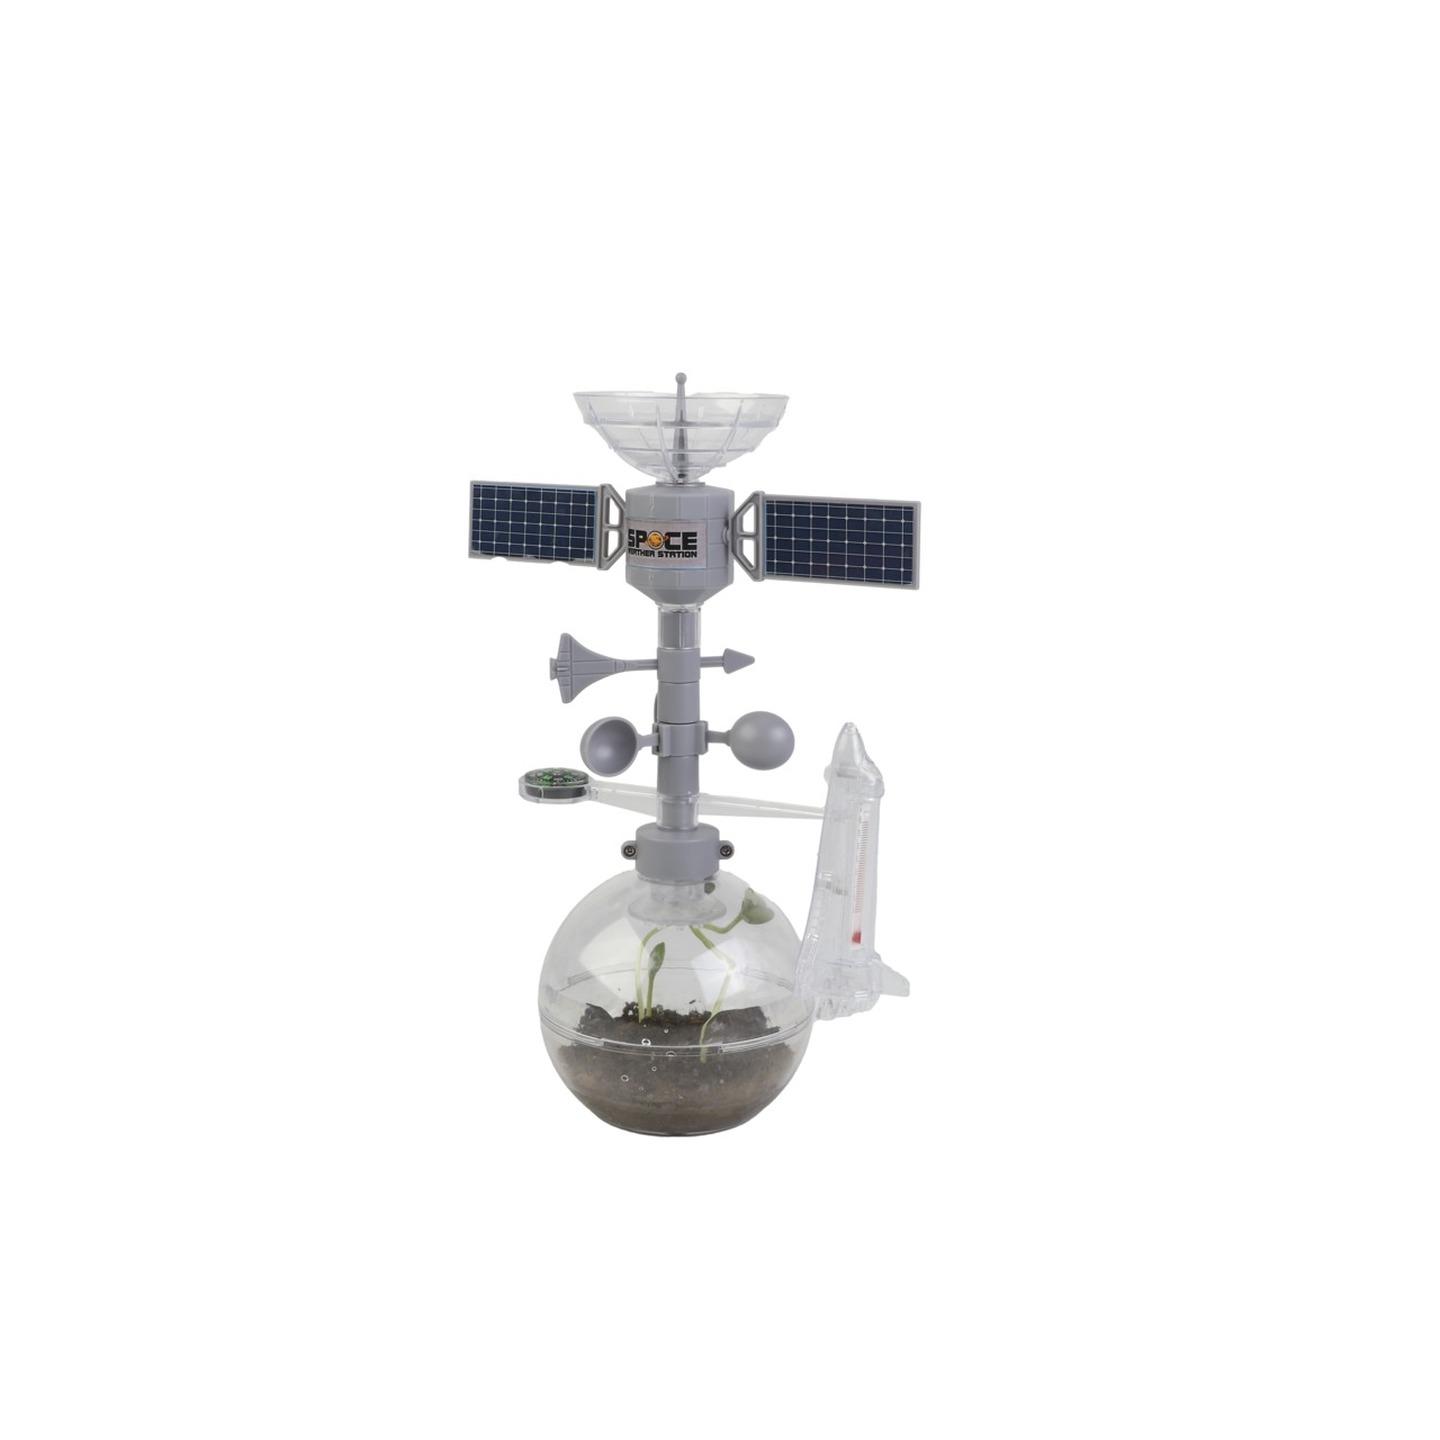 The Outer Space Weather Station Kit